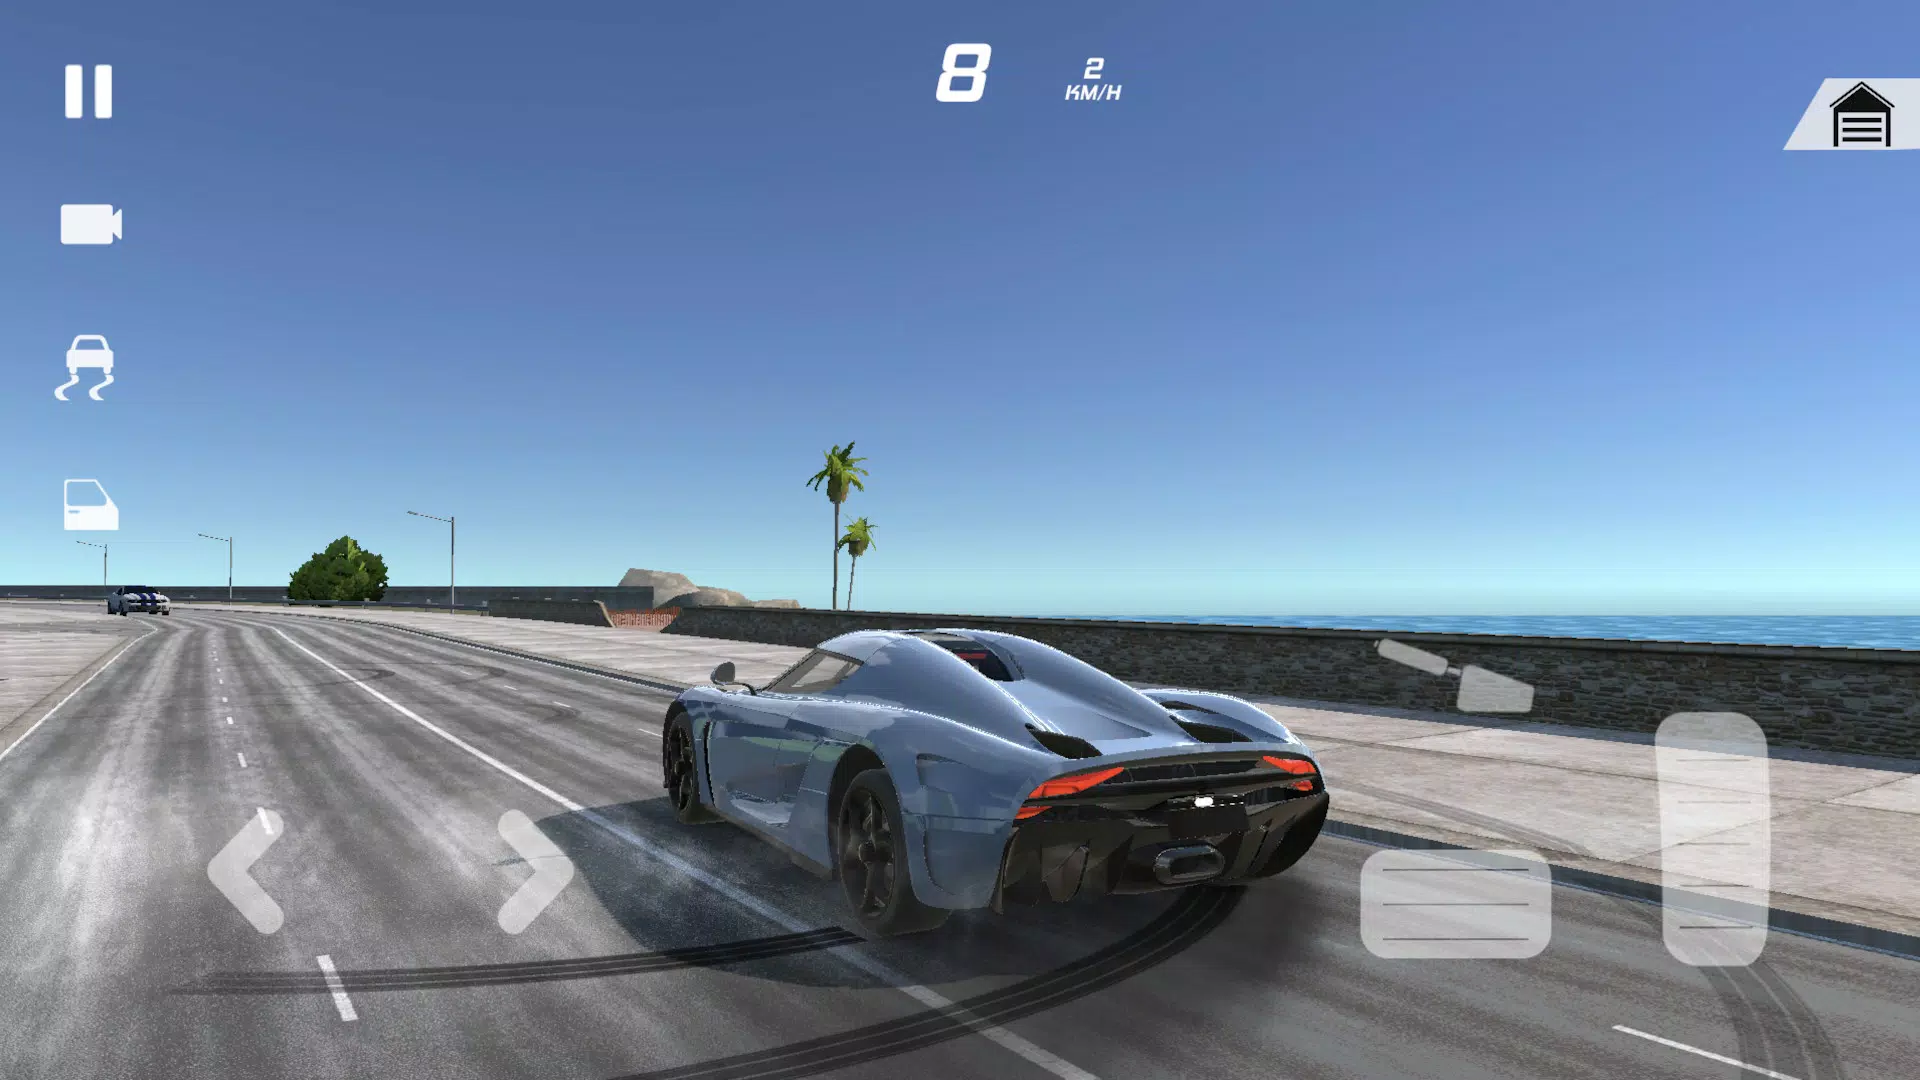 Real City Car Driver Apk Download Free Racing Game For – Images